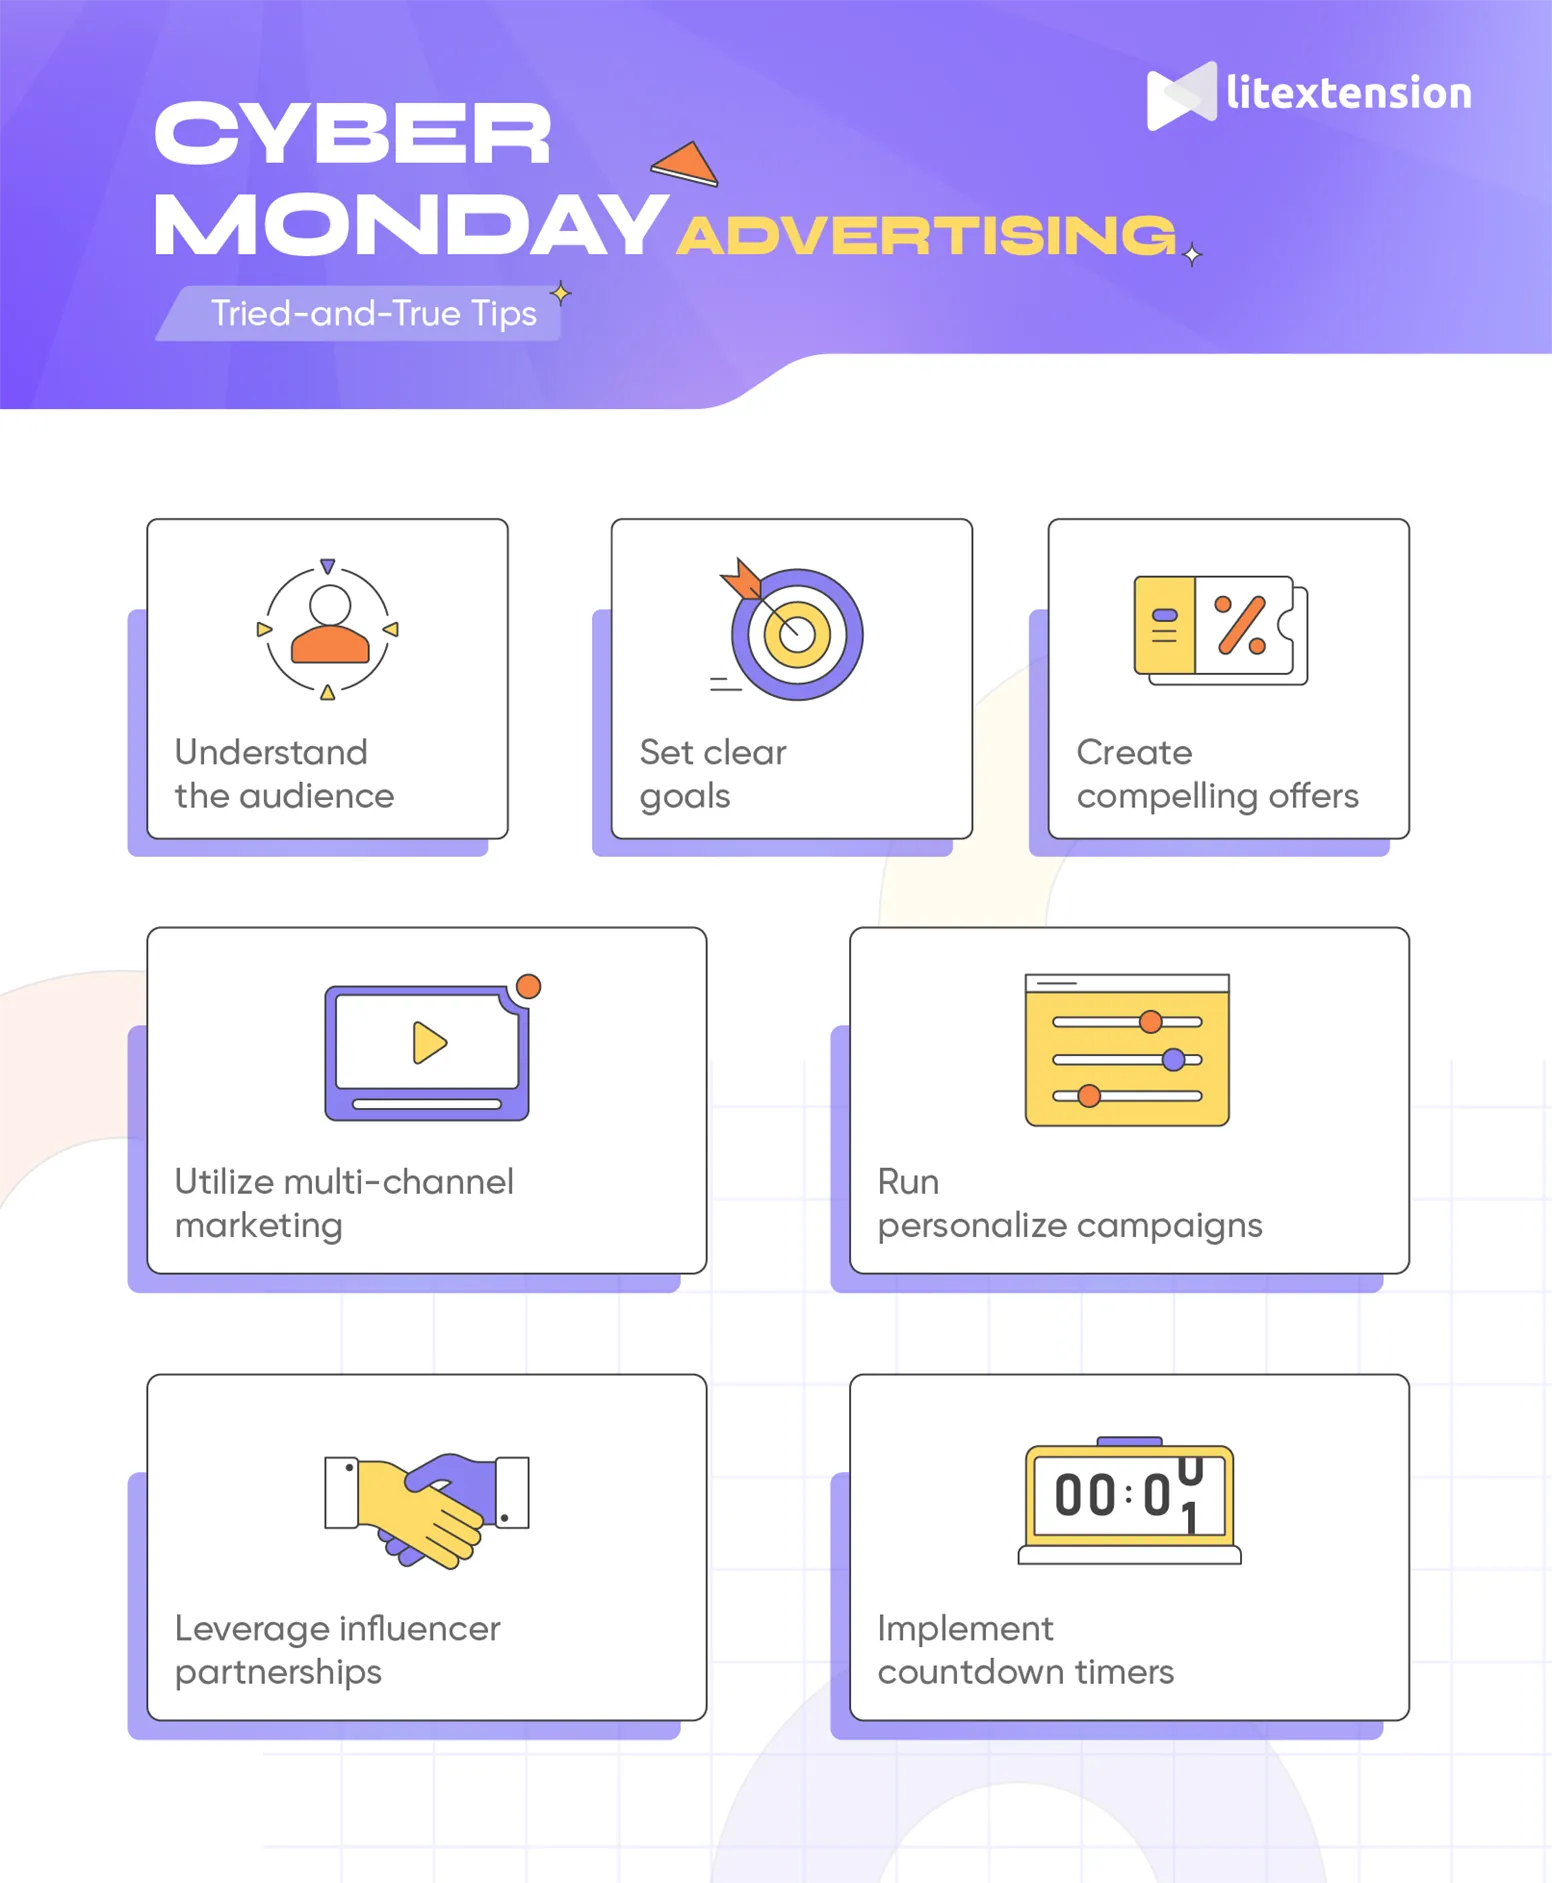 Cyber Monday Advertising tips